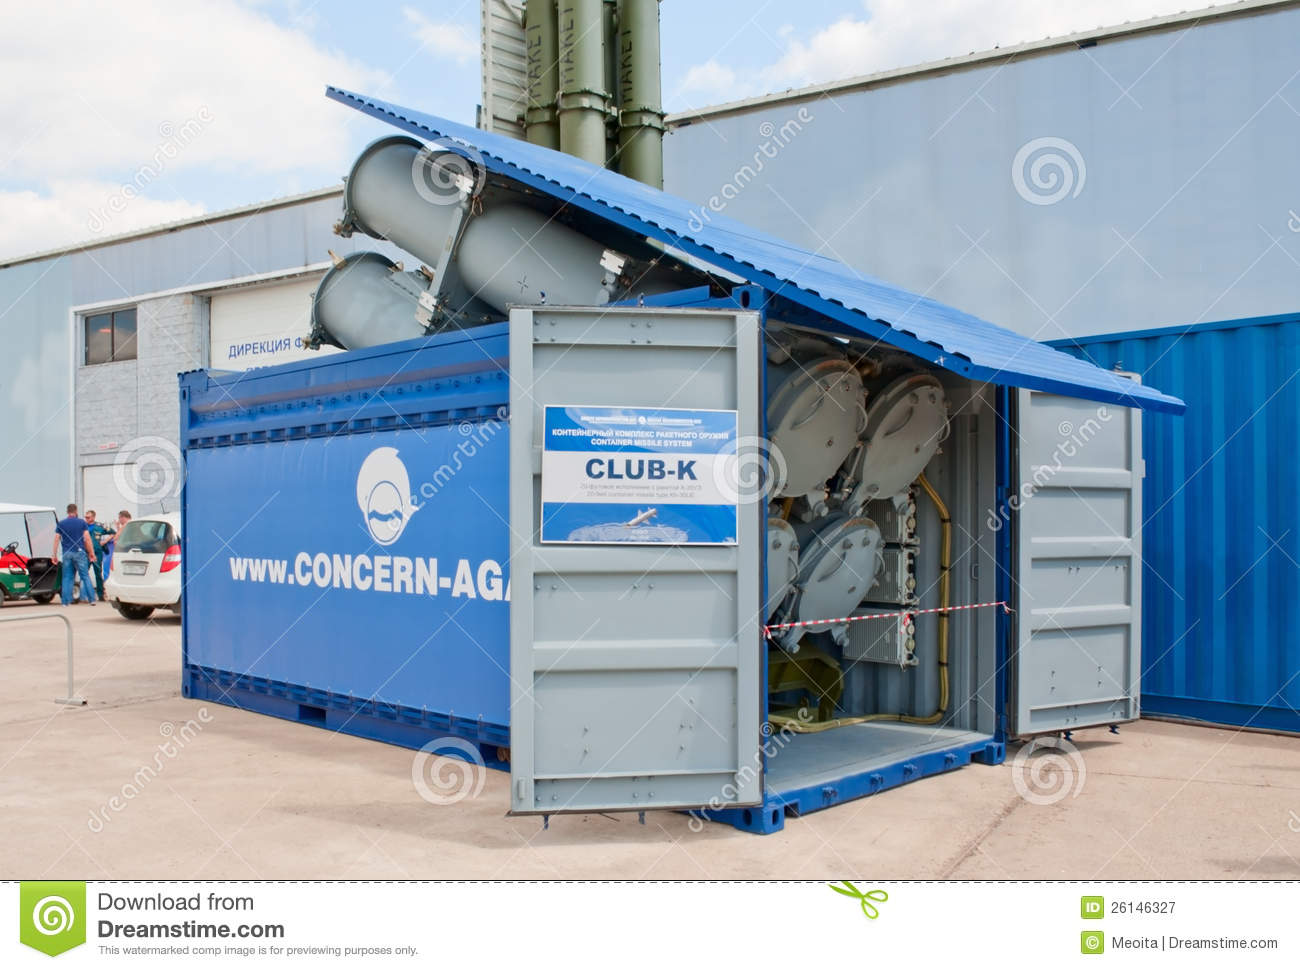 club-k-container-missile-system-26146327